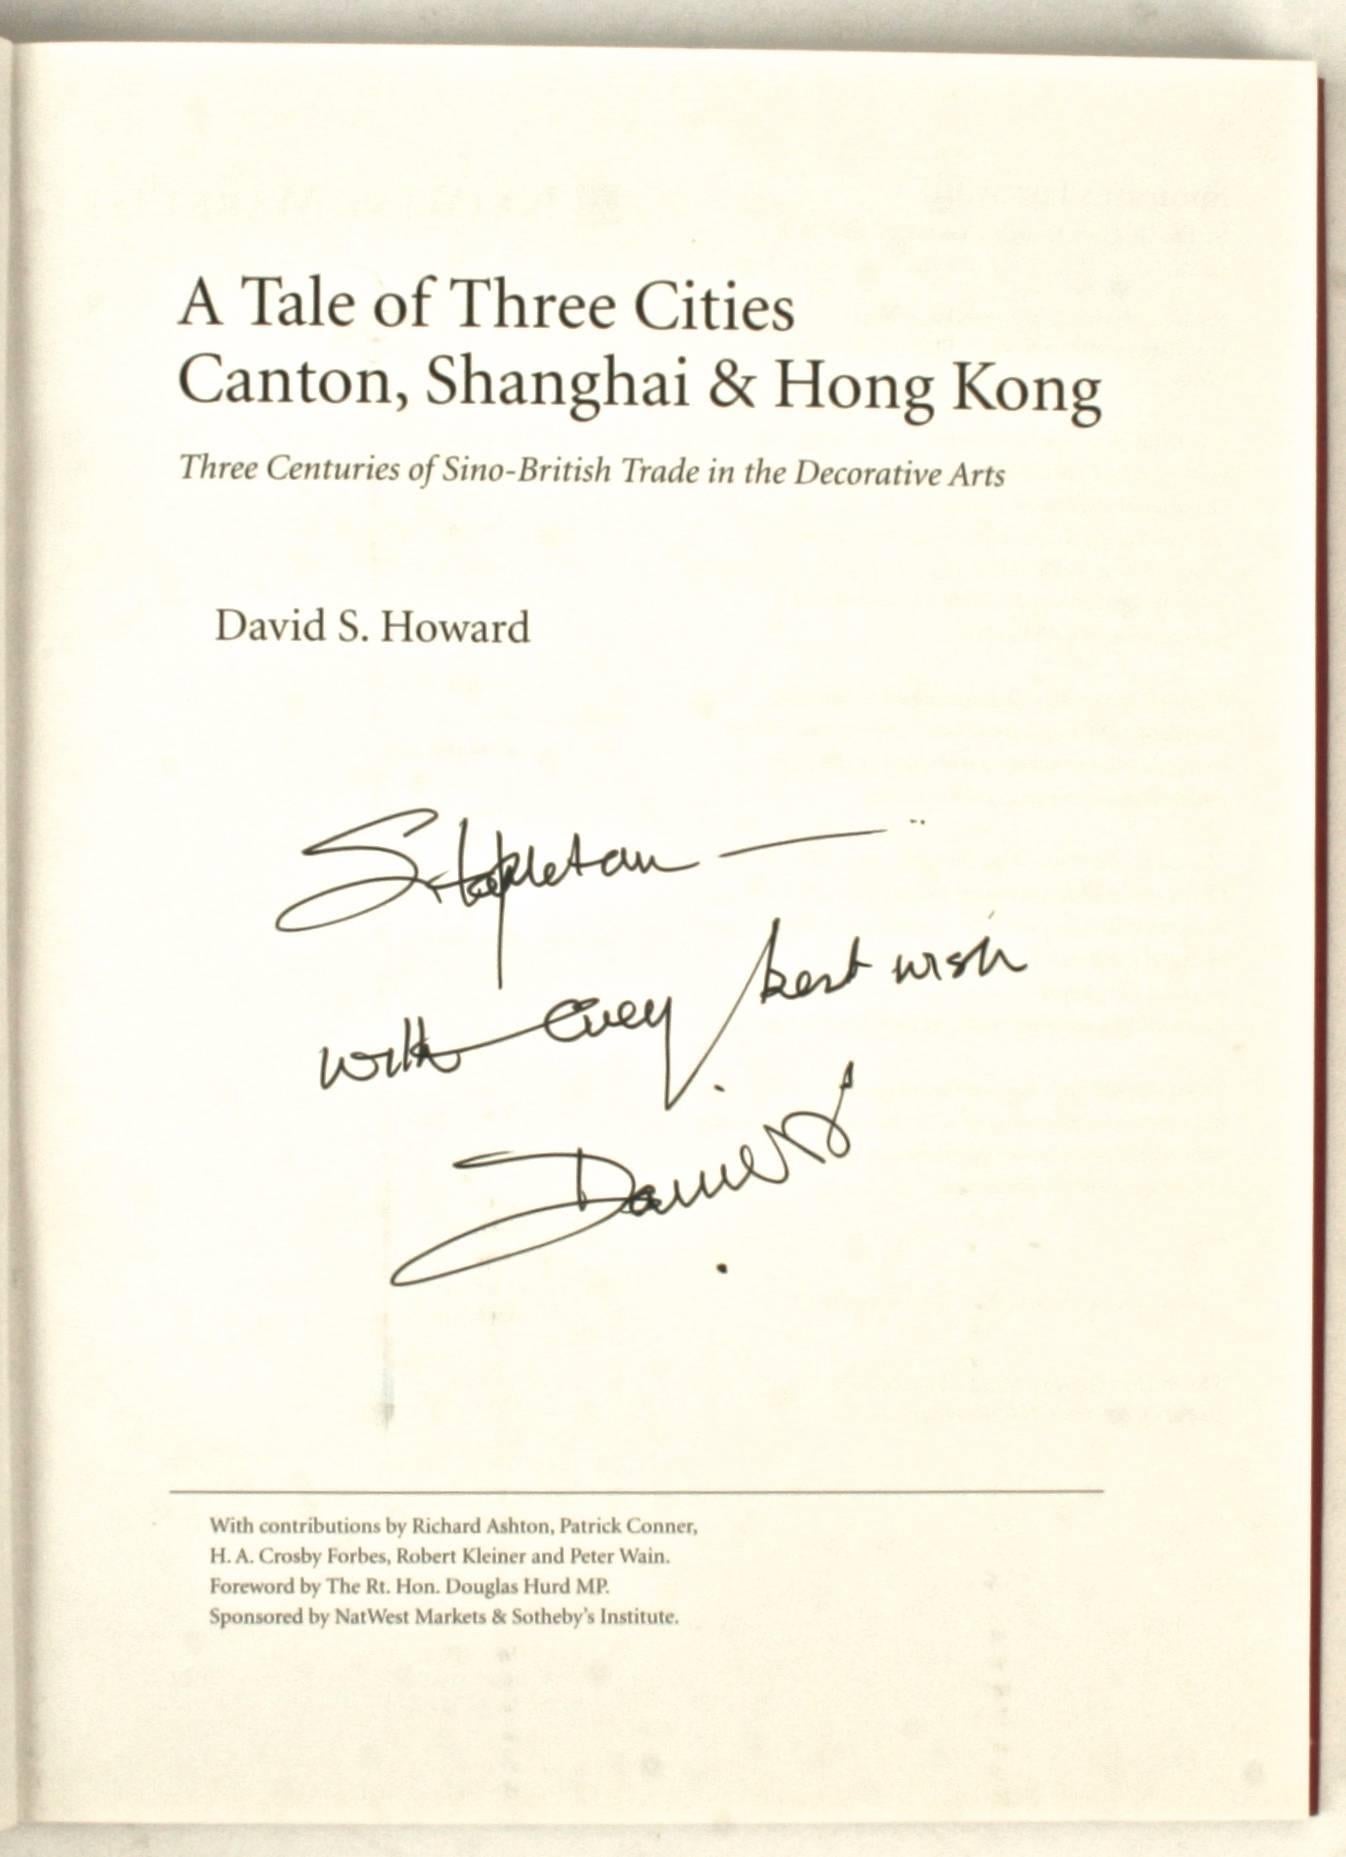 Tale of Three Cities: Canton, Shanghai & Hong Kong. Three centuries of Sino-British trade in the decorative arts by David S. Howard. Inscribed 1st edition. Sotheby’s, London, 1997. 272pp. 400 color illustrations. Illustrating the trading links that